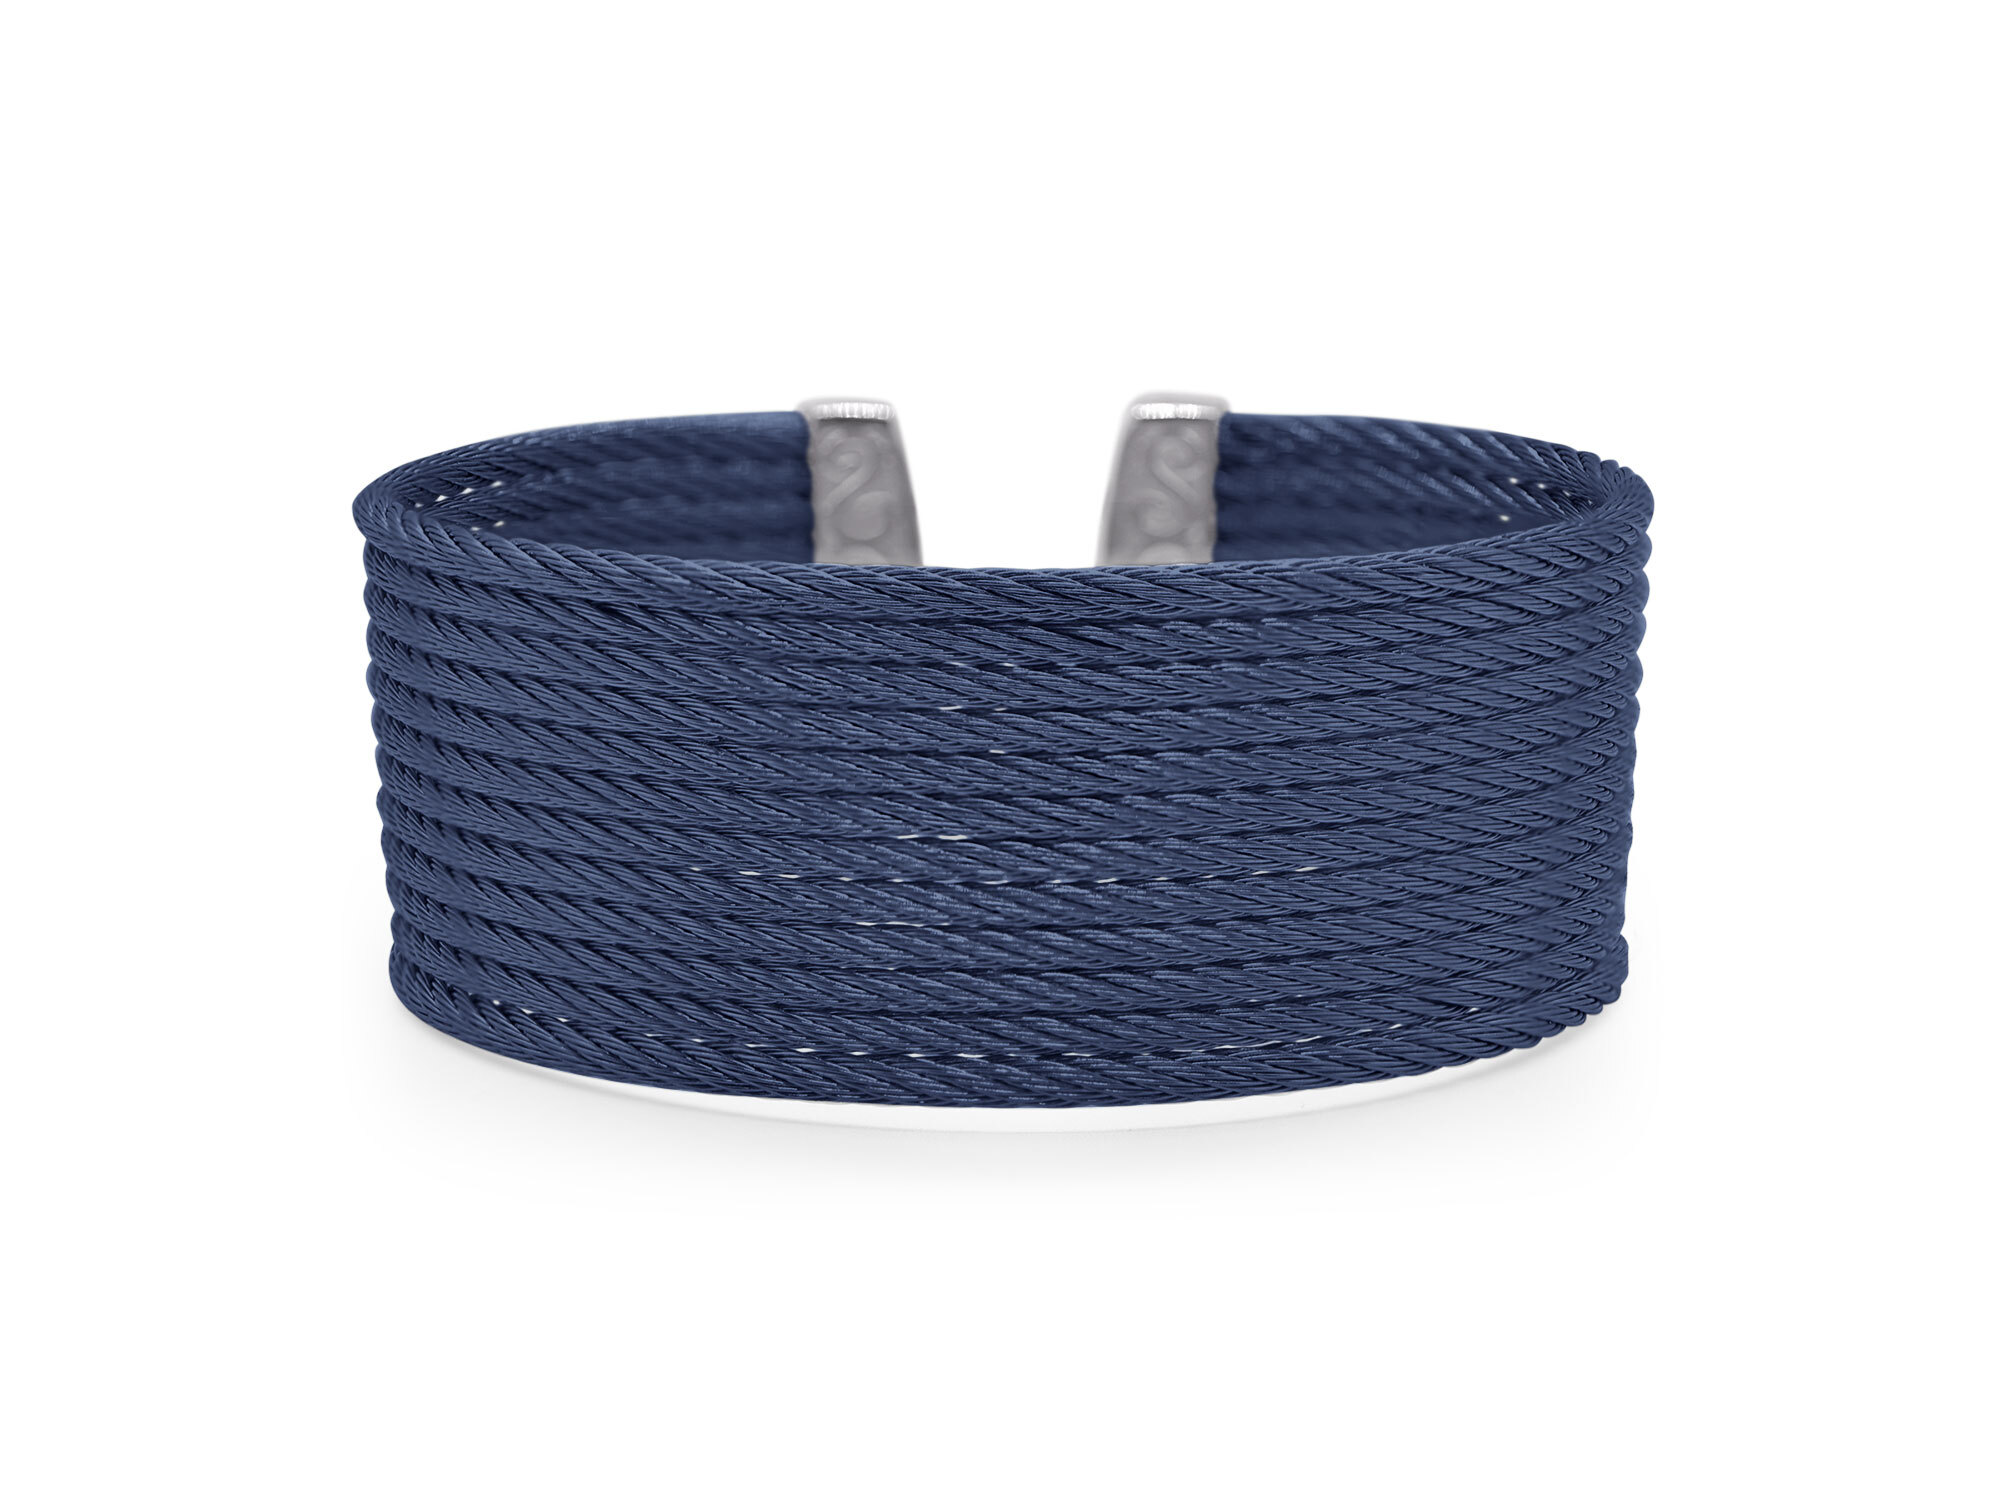 Blueberry Cable 12-Row Cuff – Blueberry